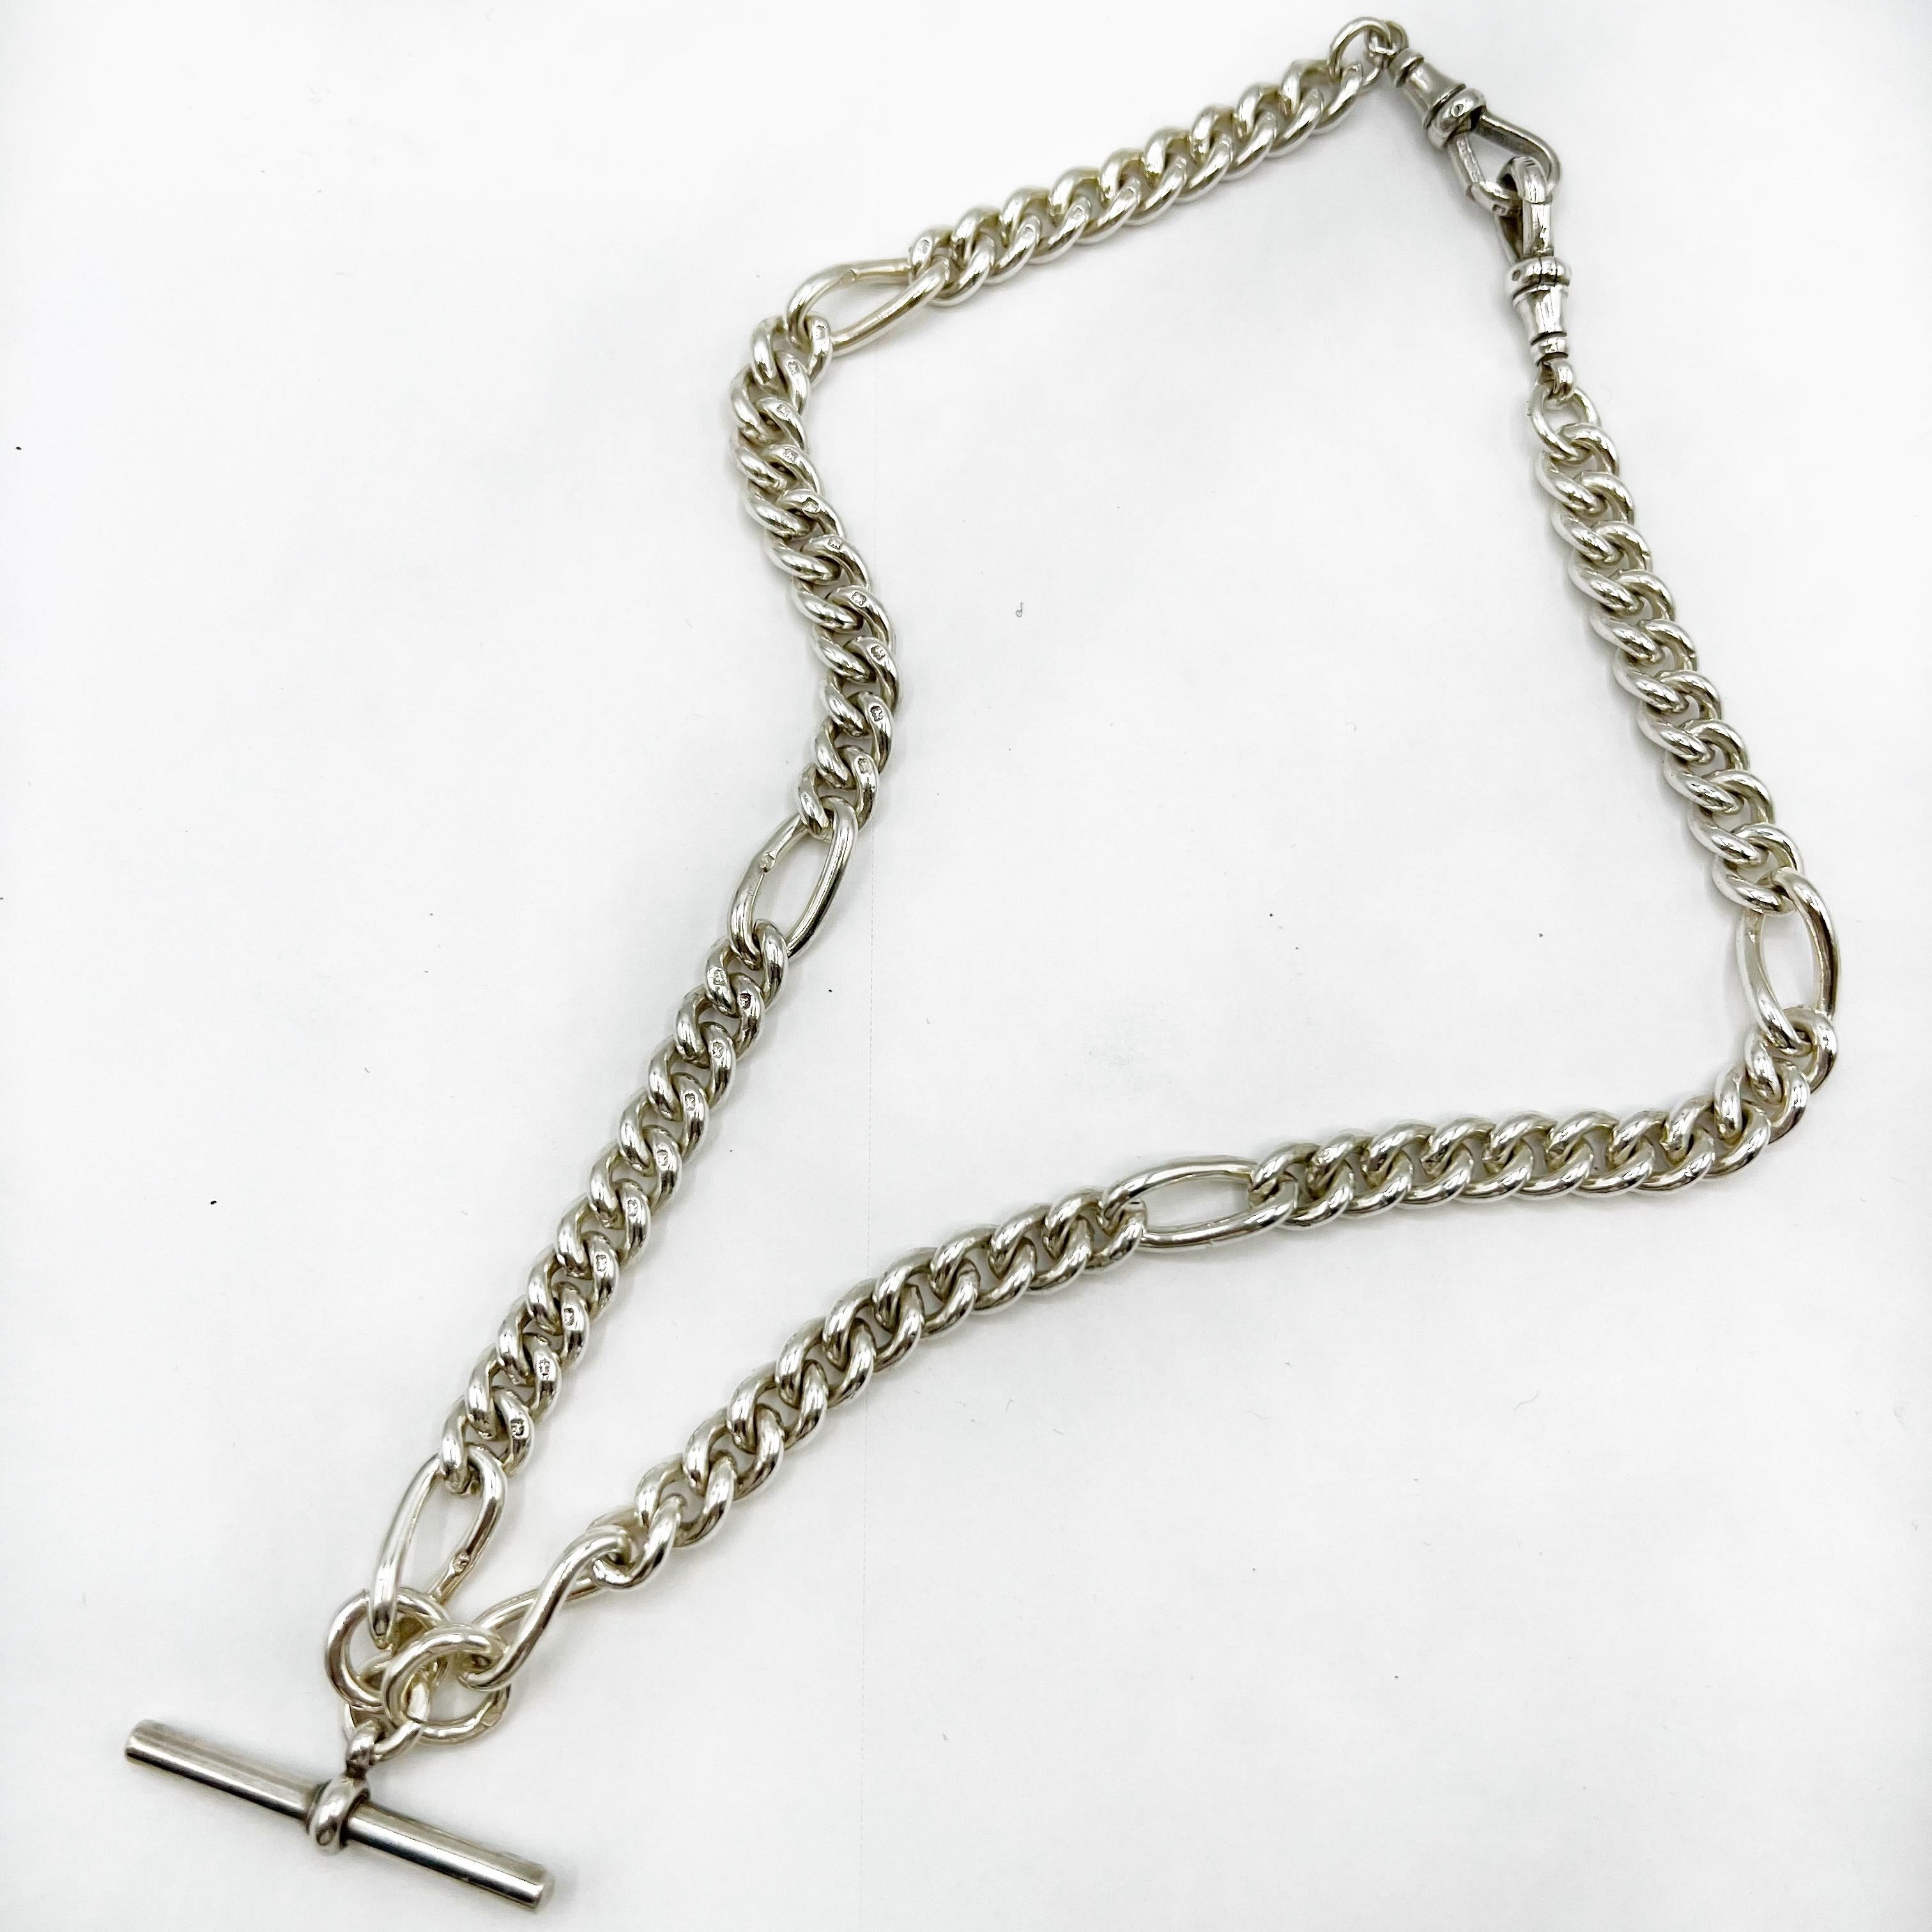 This  beautiful and elegant Victorian belcher chain is 17